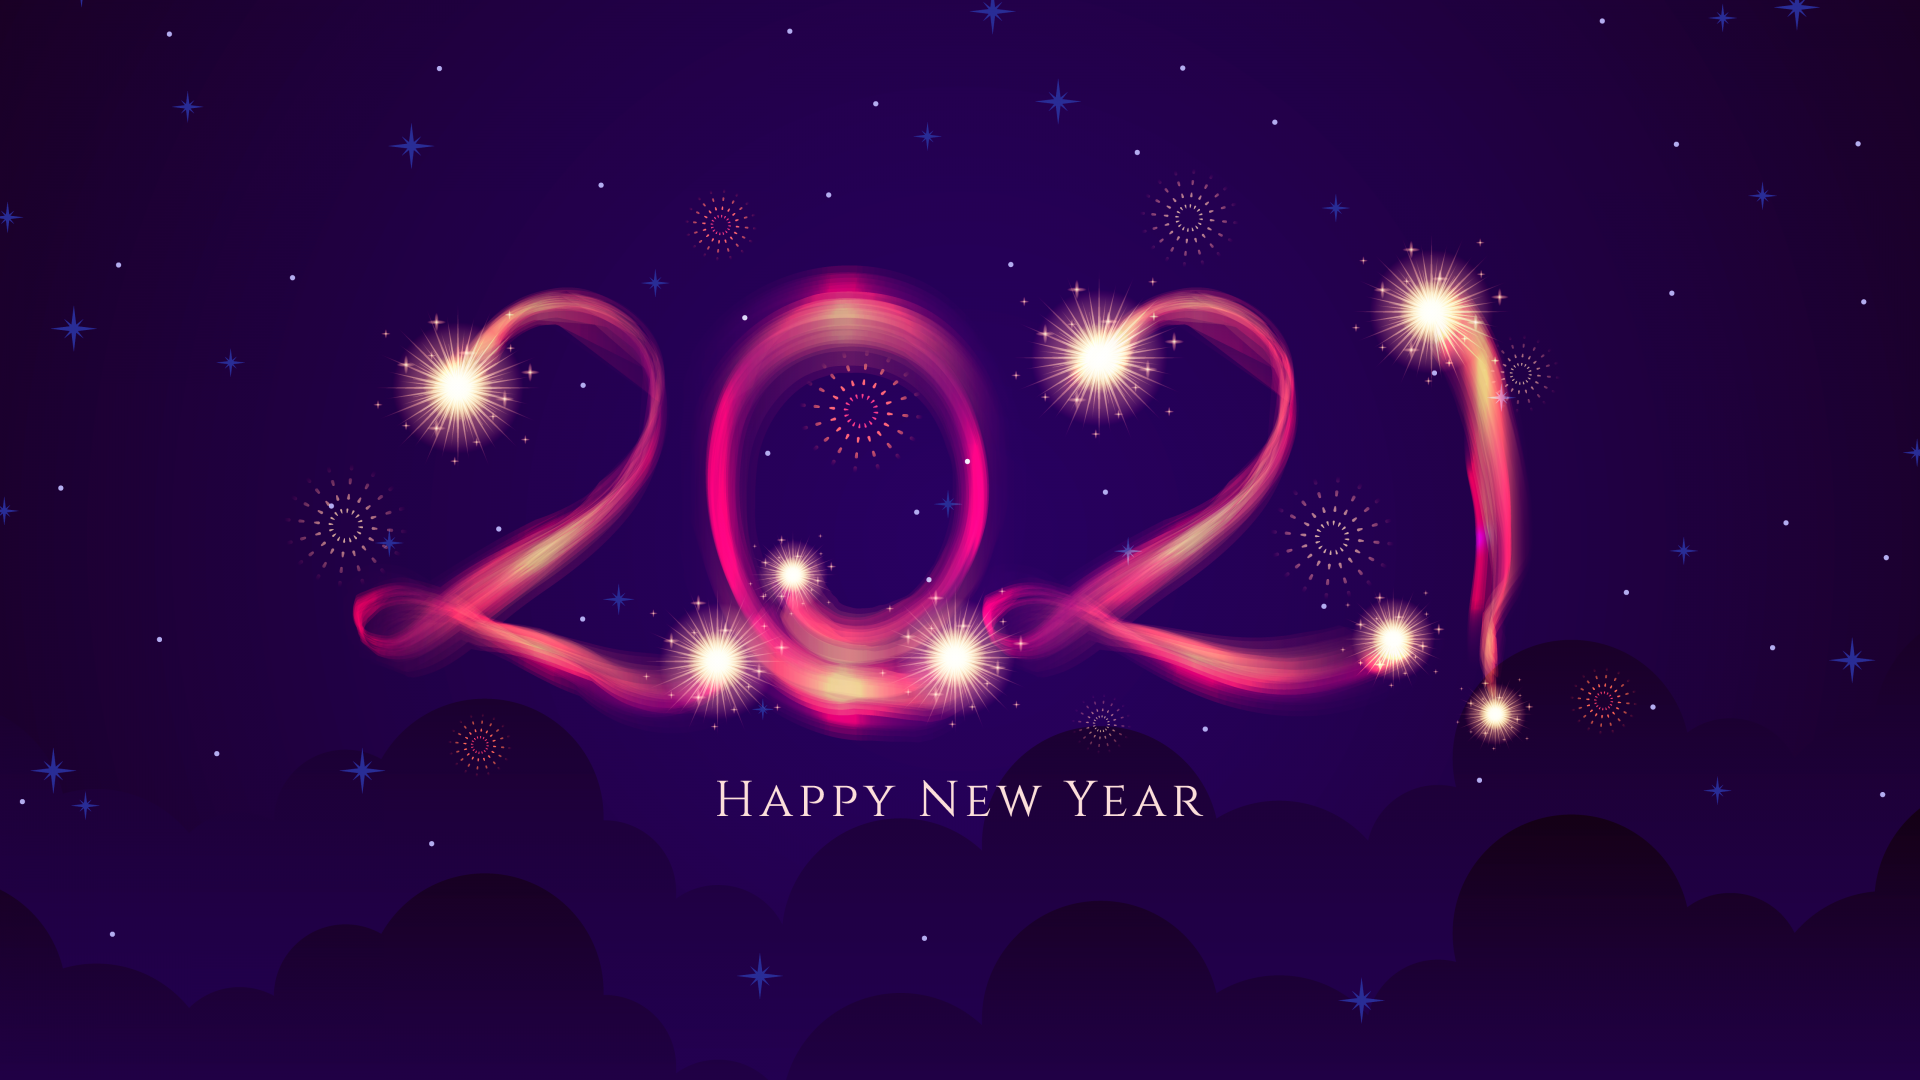 2021-new-year-happy-new-year-fireworks-dark-background-1920x1080-3493.png